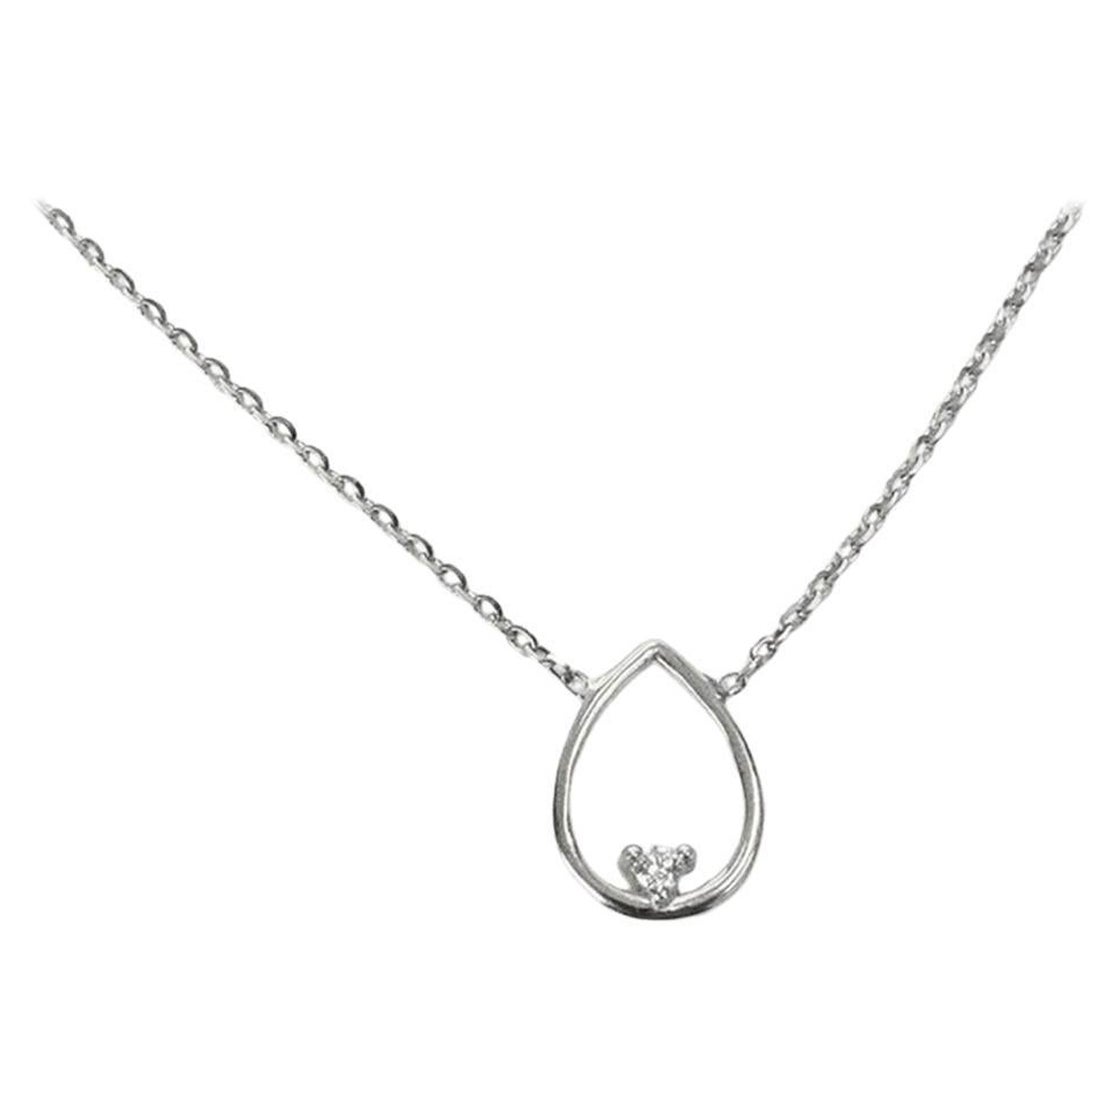 Gold Diamond Necklace is made of 14k solid gold available in three colors of gold,  White Gold / Rose Gold / Yellow Gold.

Natural genuine round cut diamond each diamond is hand selected by me to ensure quality and set by a master setter in our